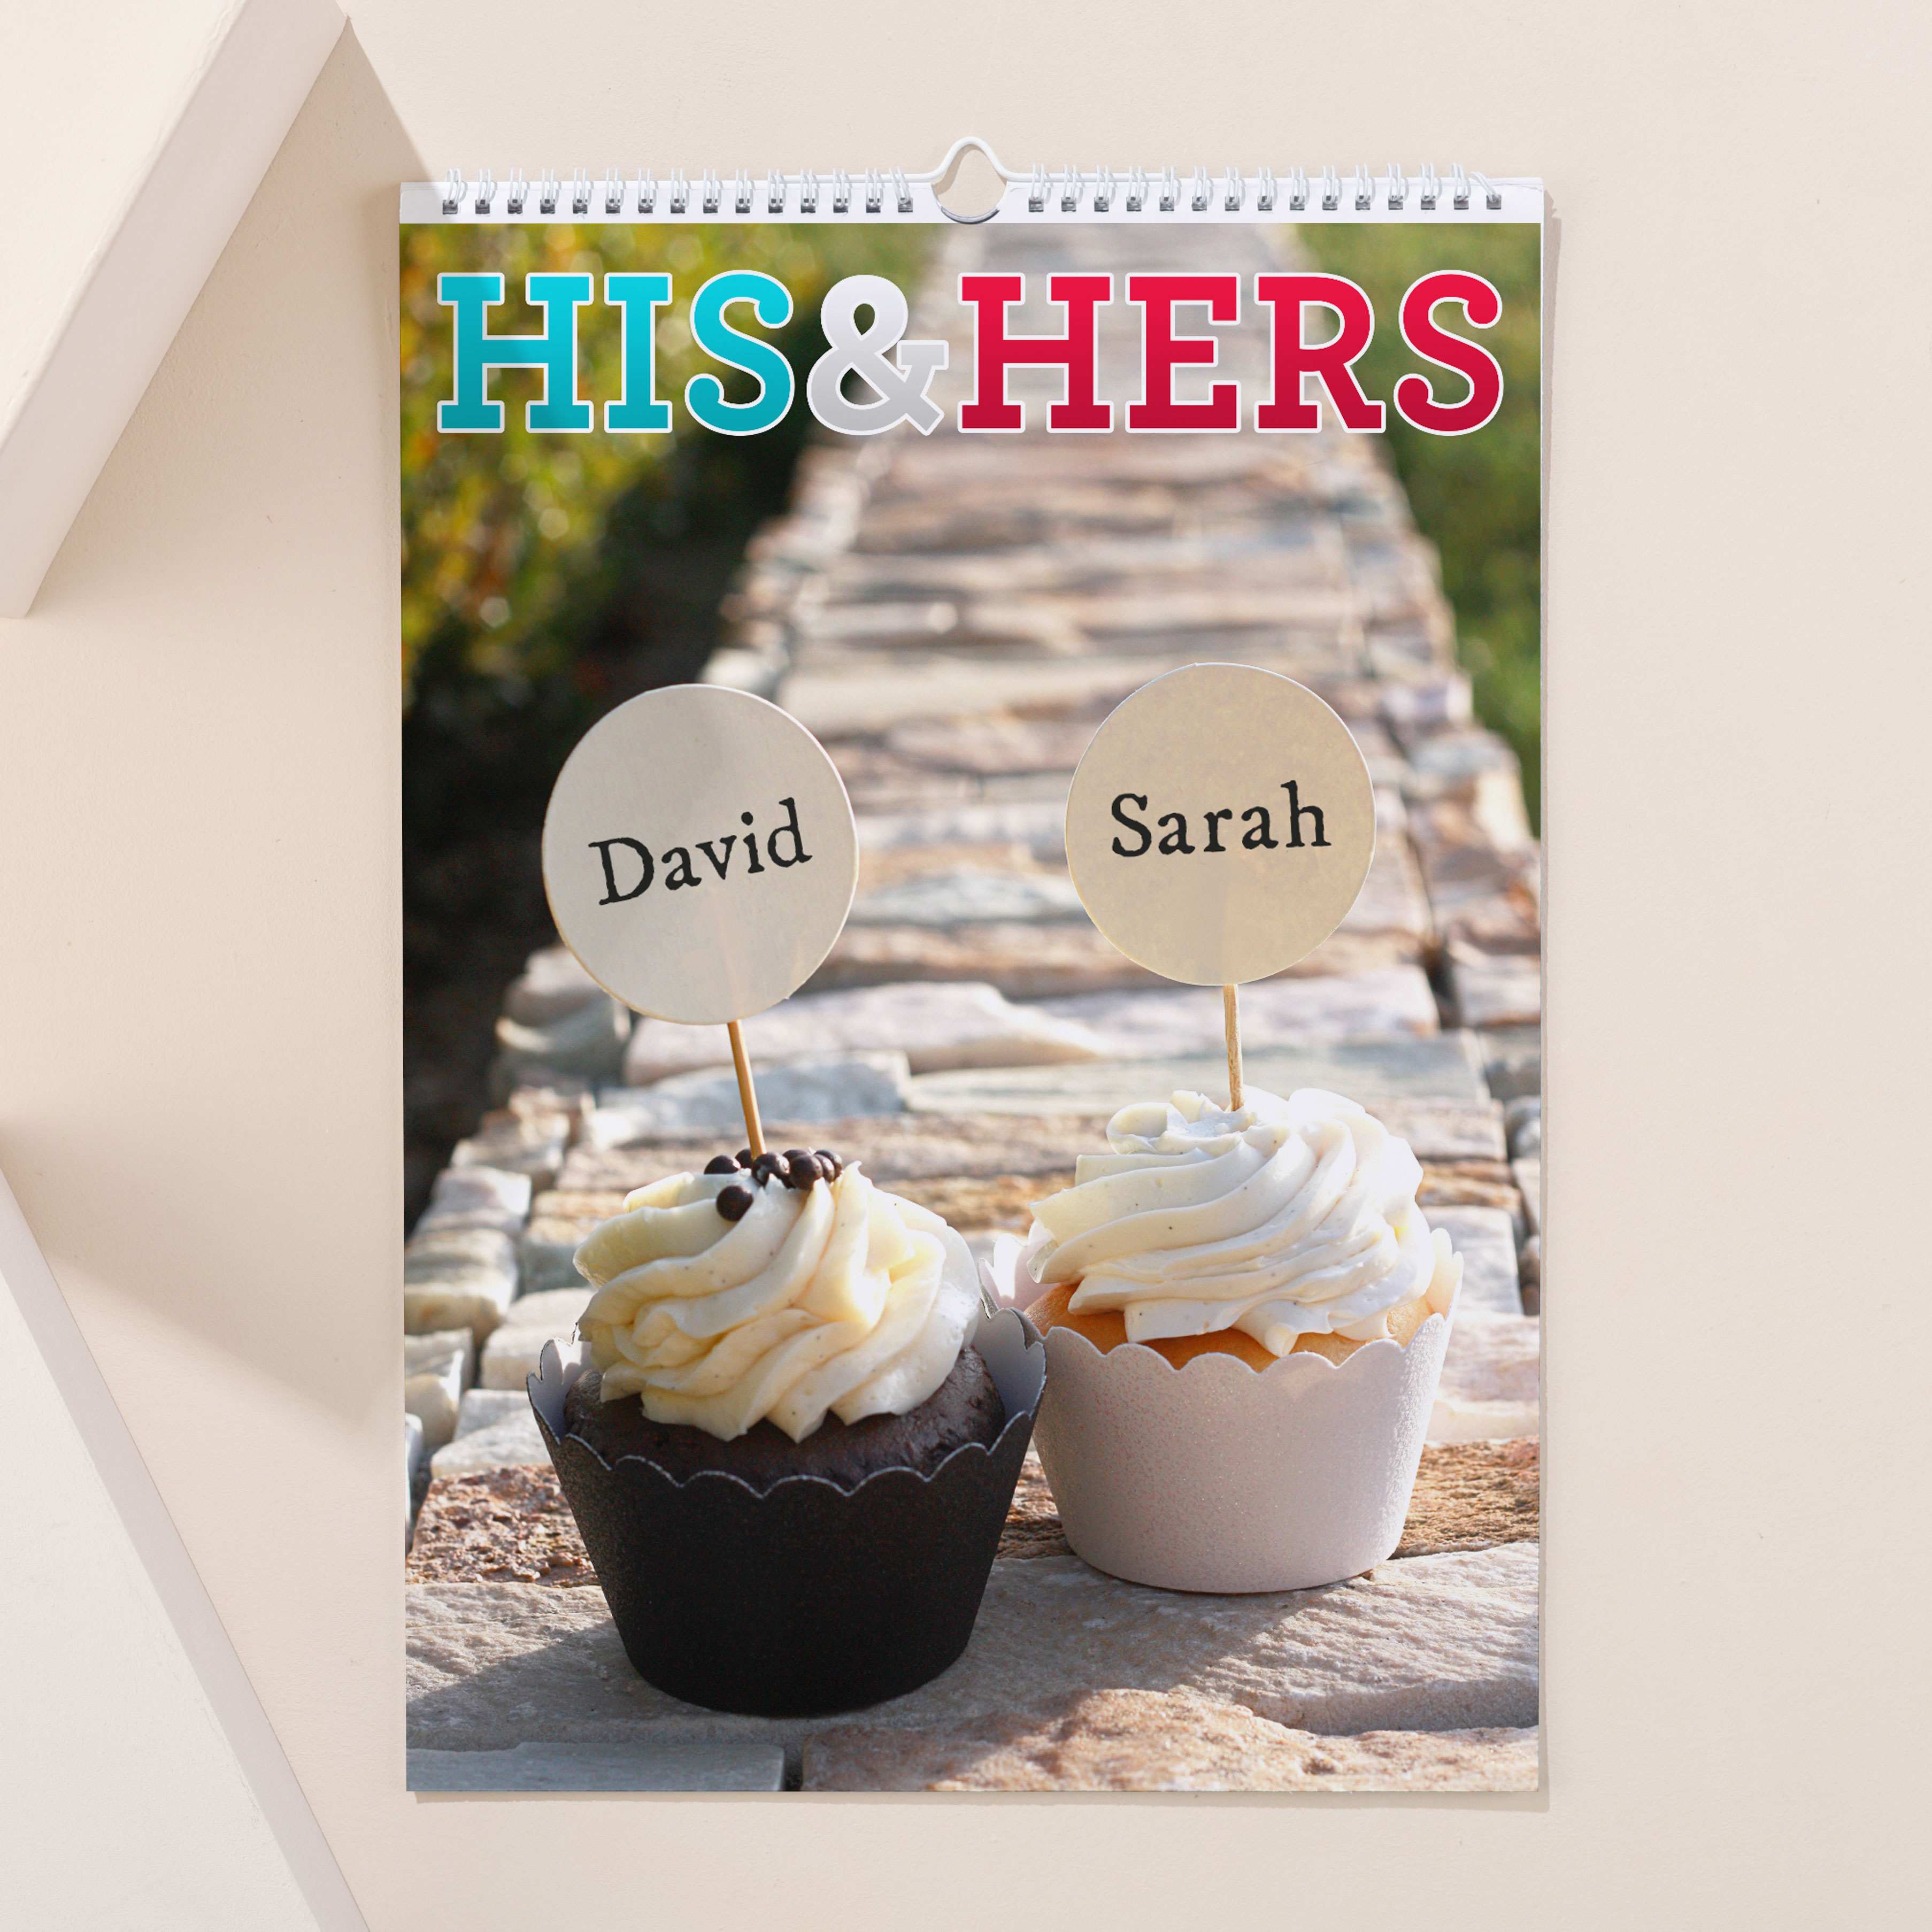 Personalised His And Hers Planner Calendar - New Edition